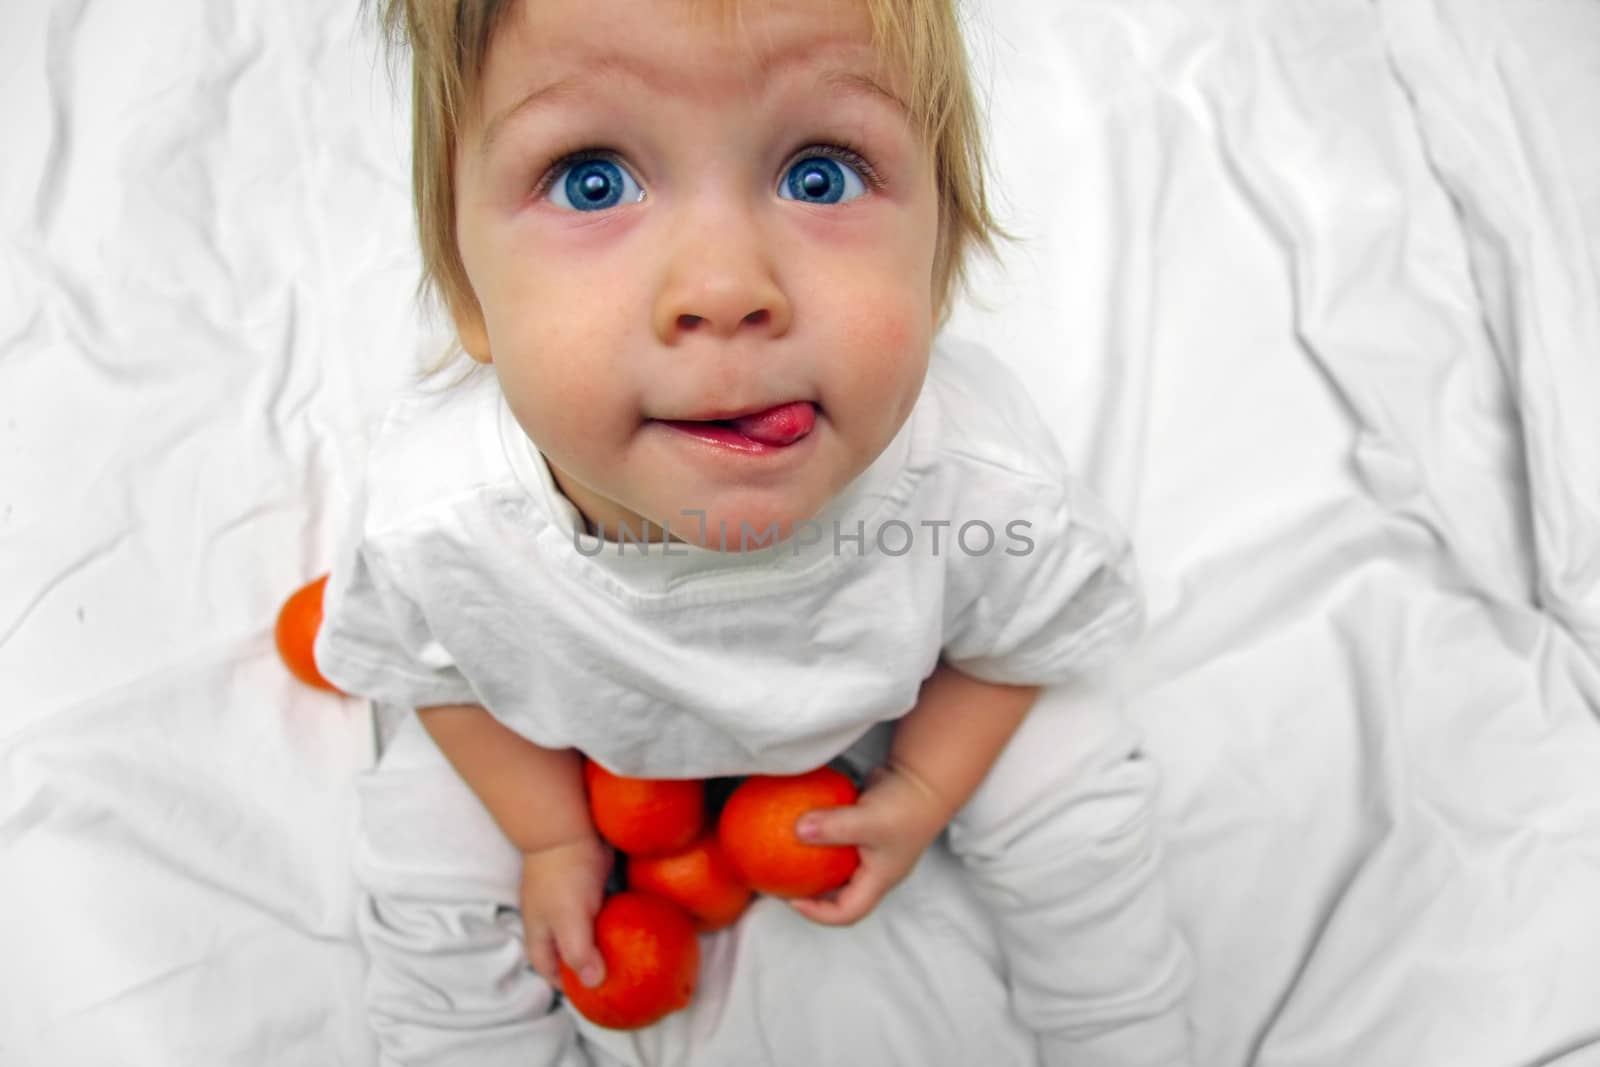 little boy with oranges licked